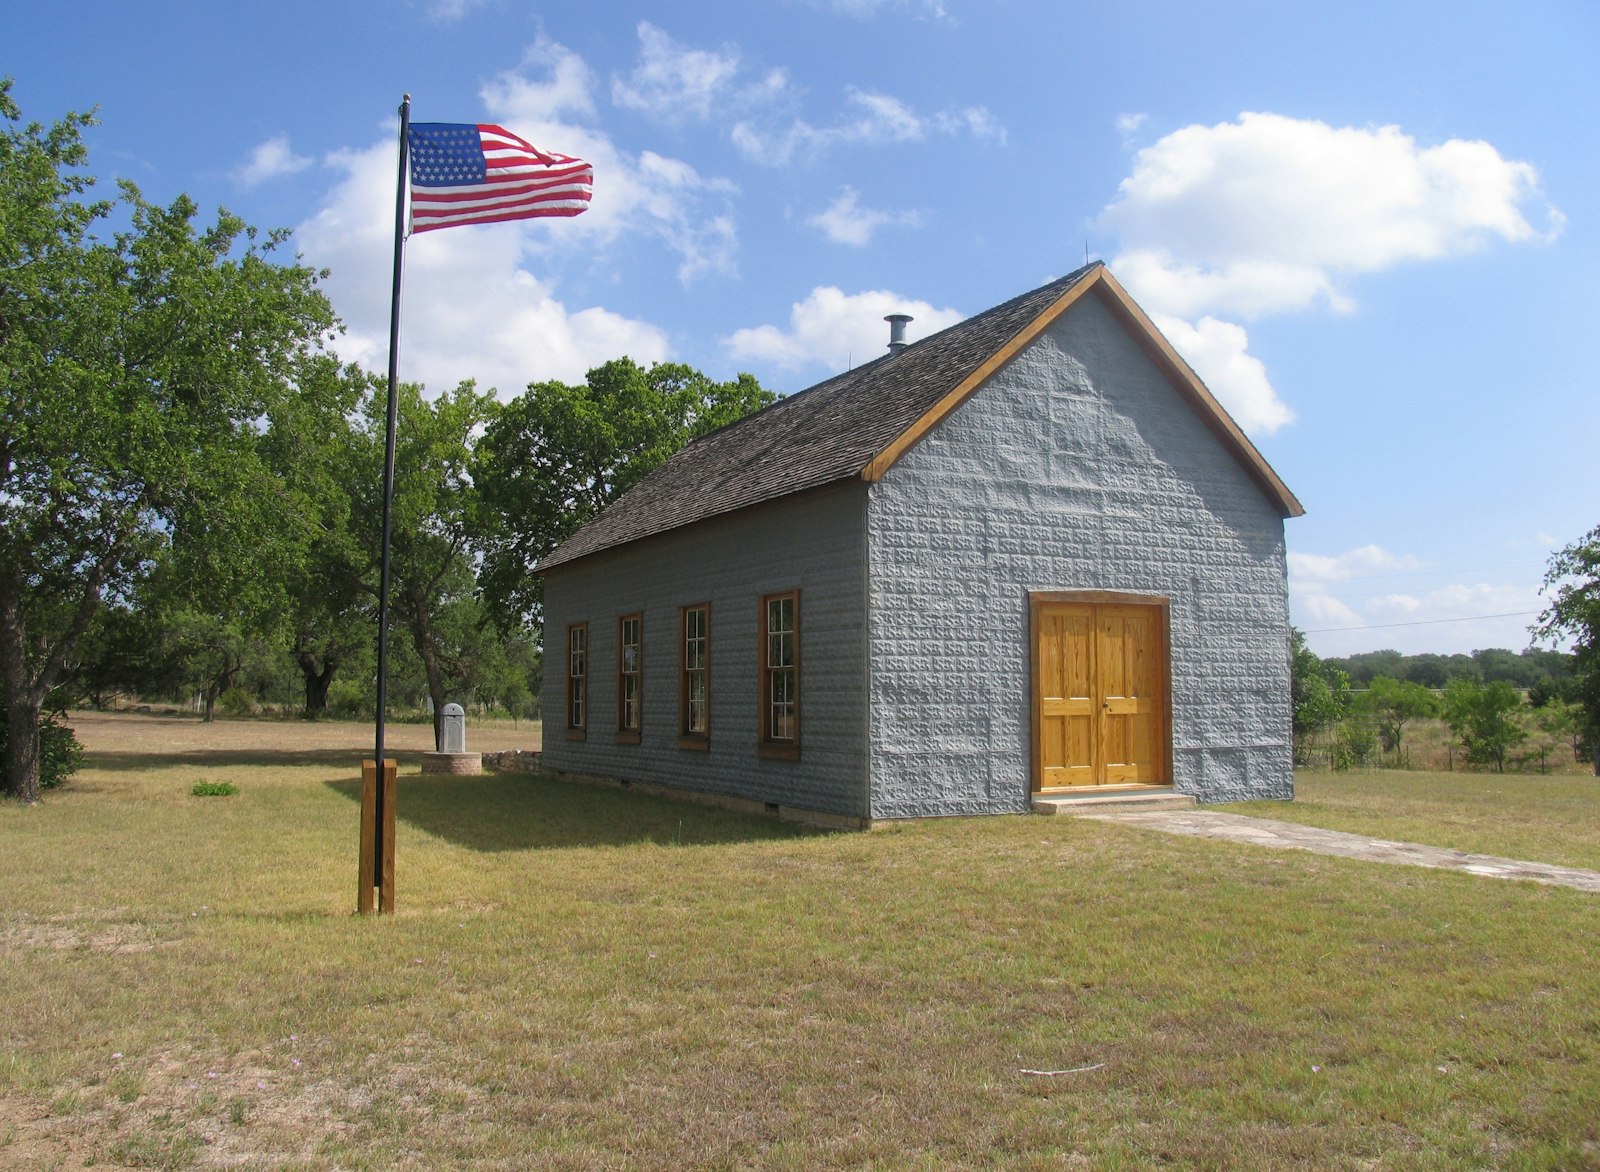 One-room schoolhouse with grey-blue facade and four windows on the side. In the lawn in front of the school flies an American flag on a flagpole